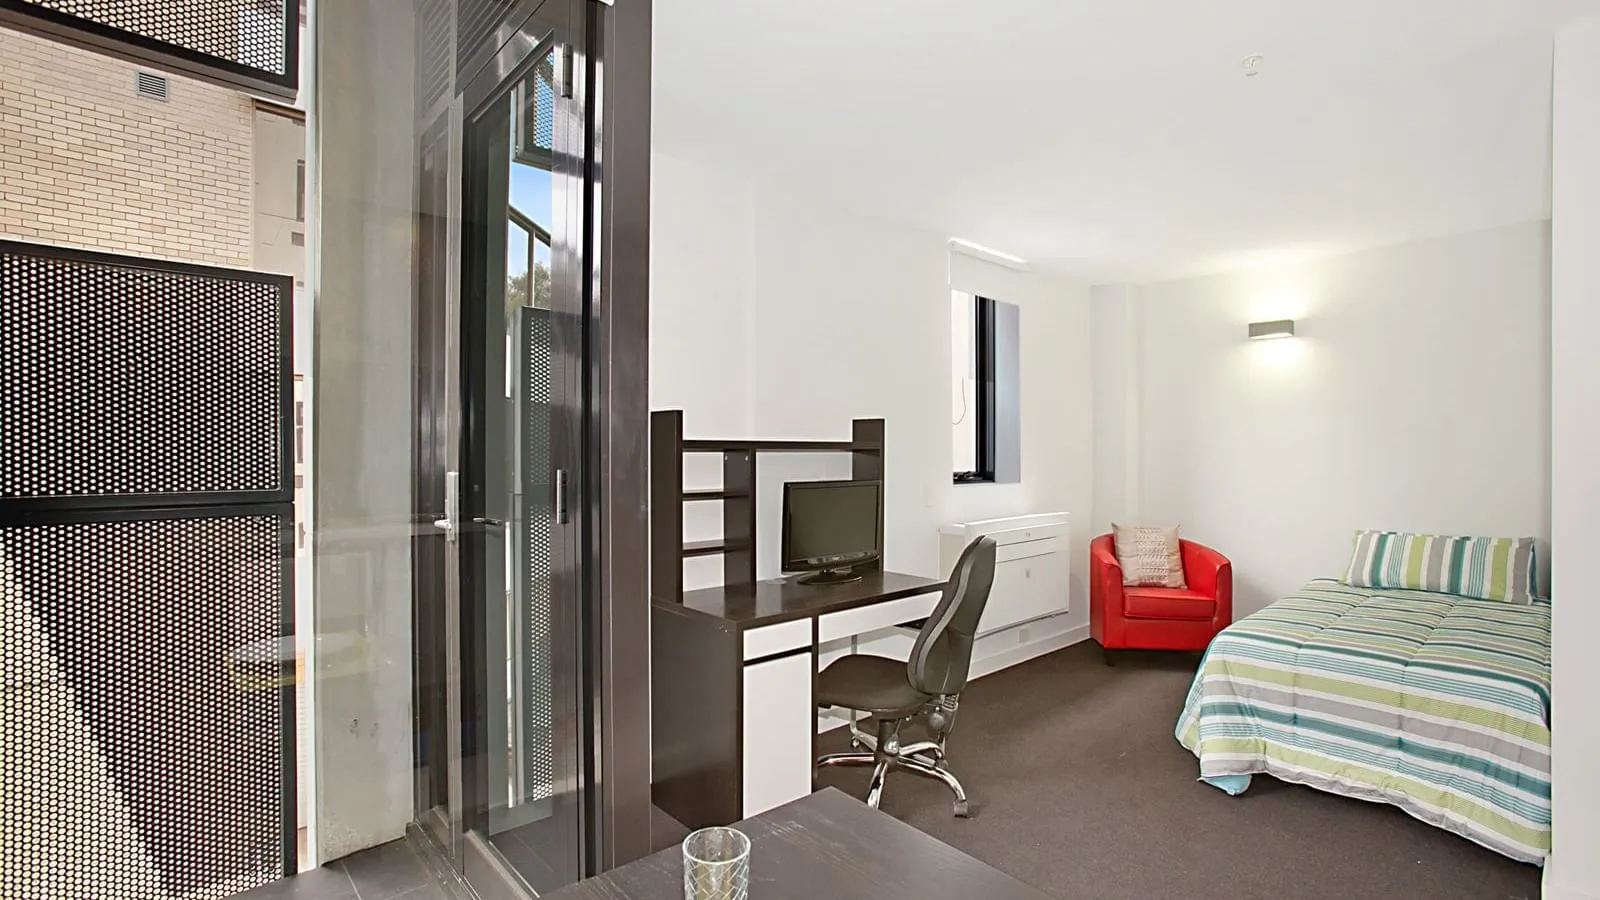 Student Living on Raleigh Melbourne